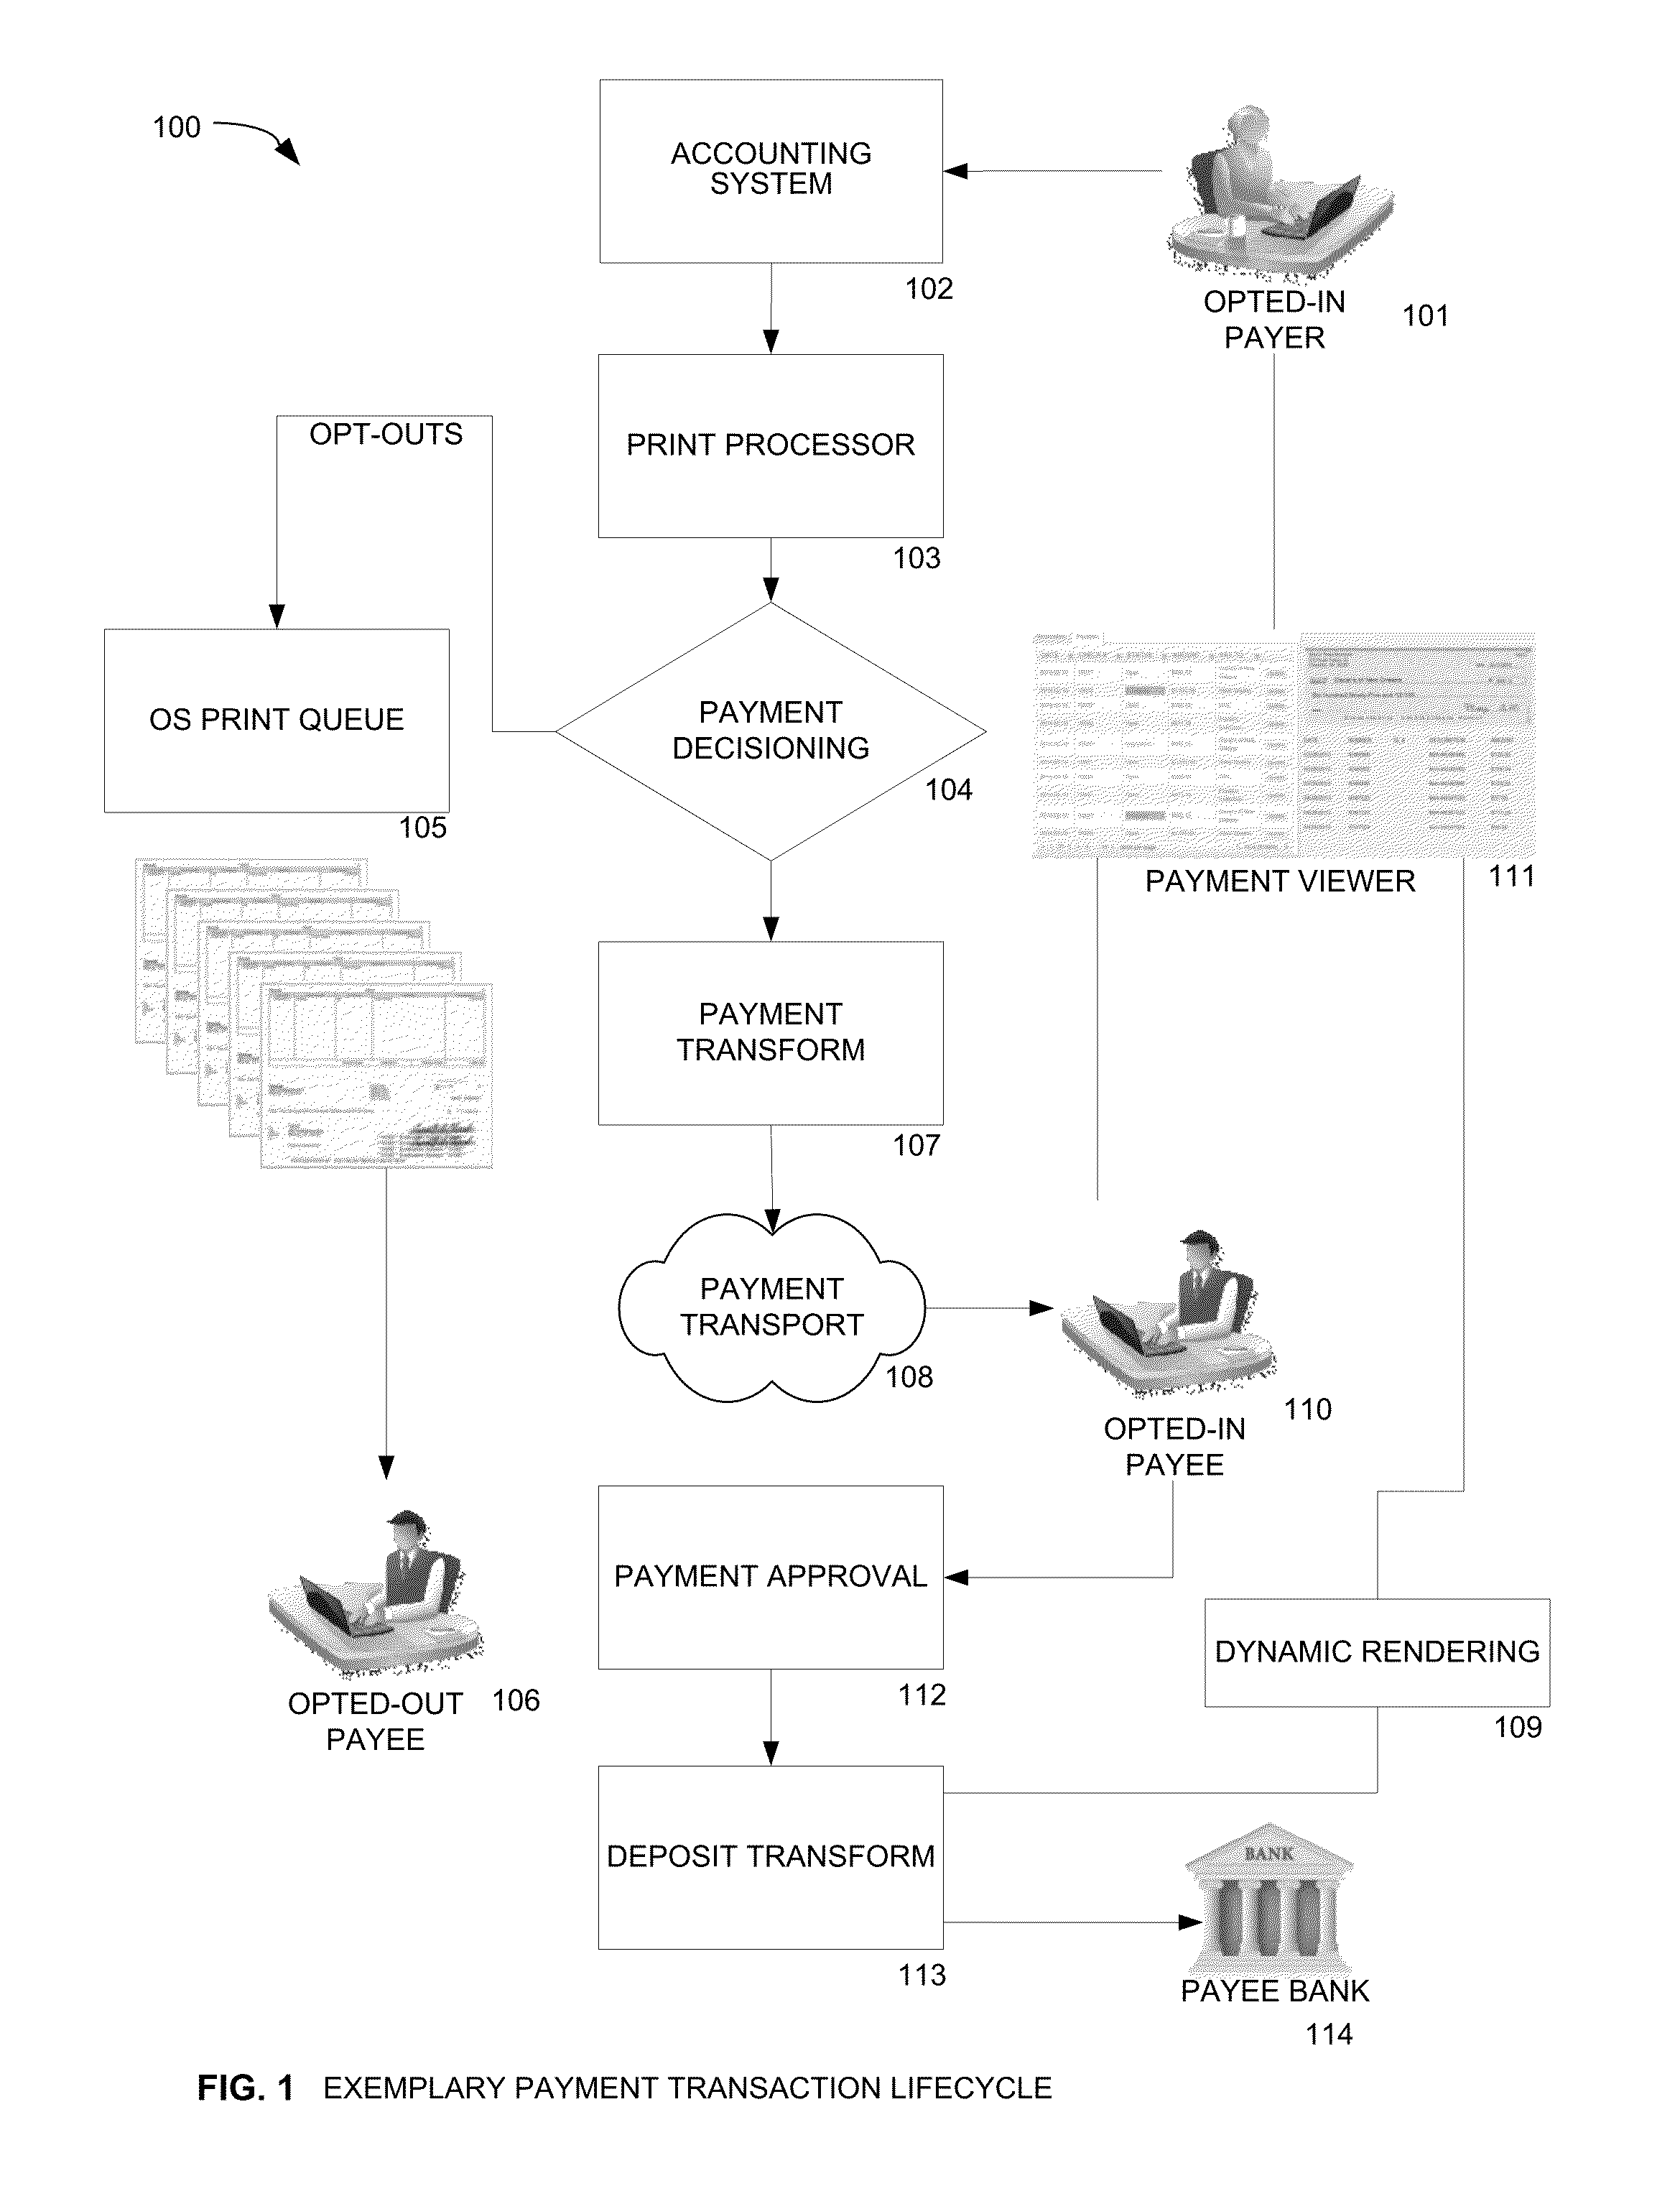 Electronic Payment System Operative with Existing Accounting Software and Existing Remote Deposit Capture and Mobile RDC Software